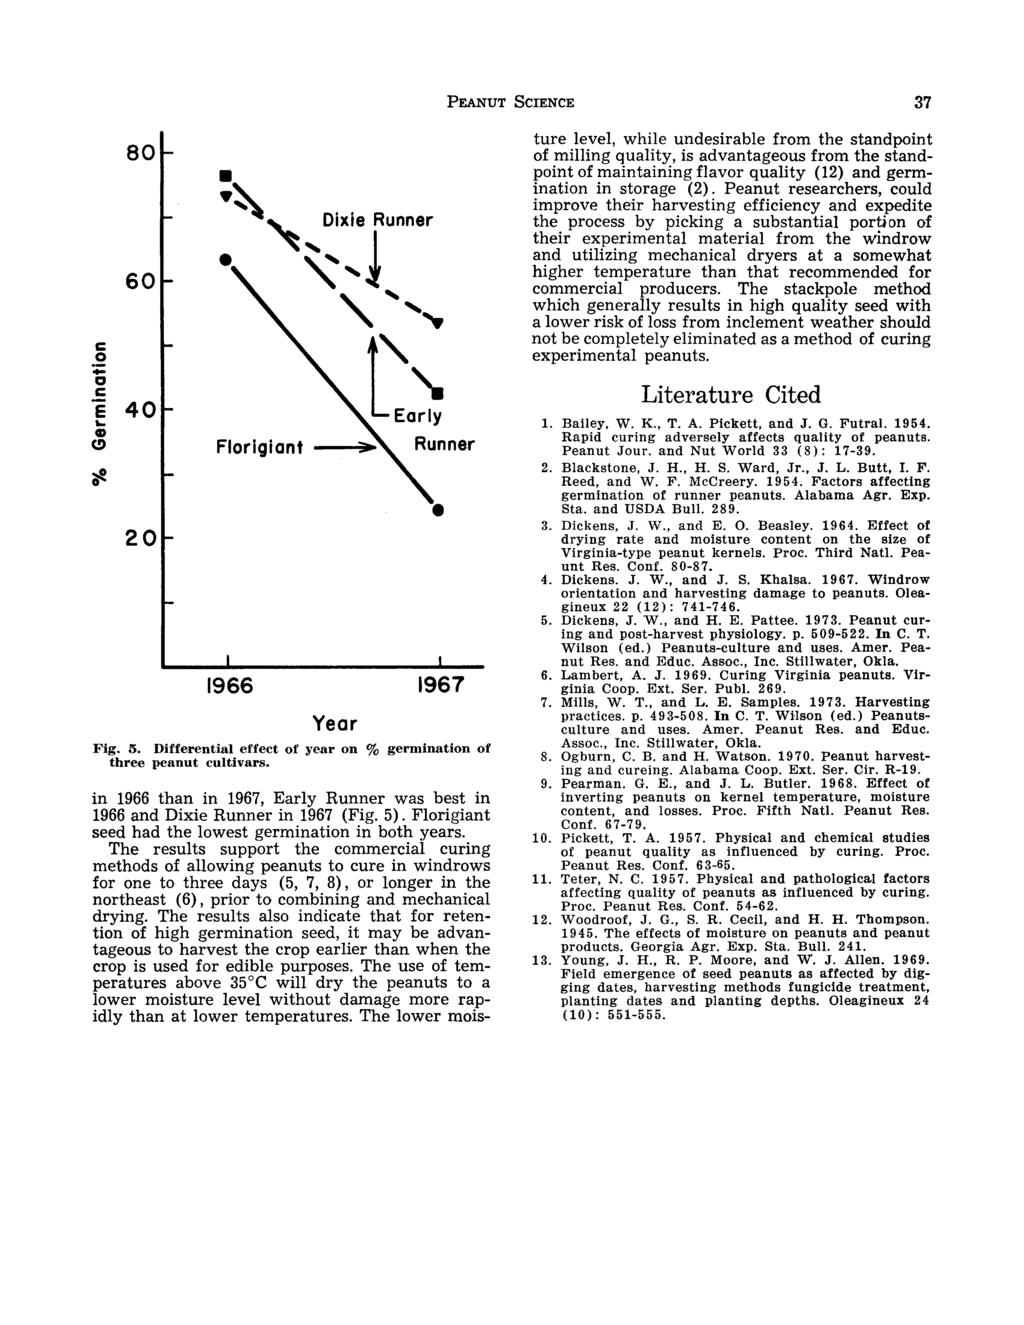 PEANUT SCIENCE 37 80 60 c 0..a c E 40 (!) 0 20., Dixie Runner,j -, '''''", Florigiant 1966 ta Runner 1967 Fig. 5. Differential effect of year on % germination of three peanut cultivars.